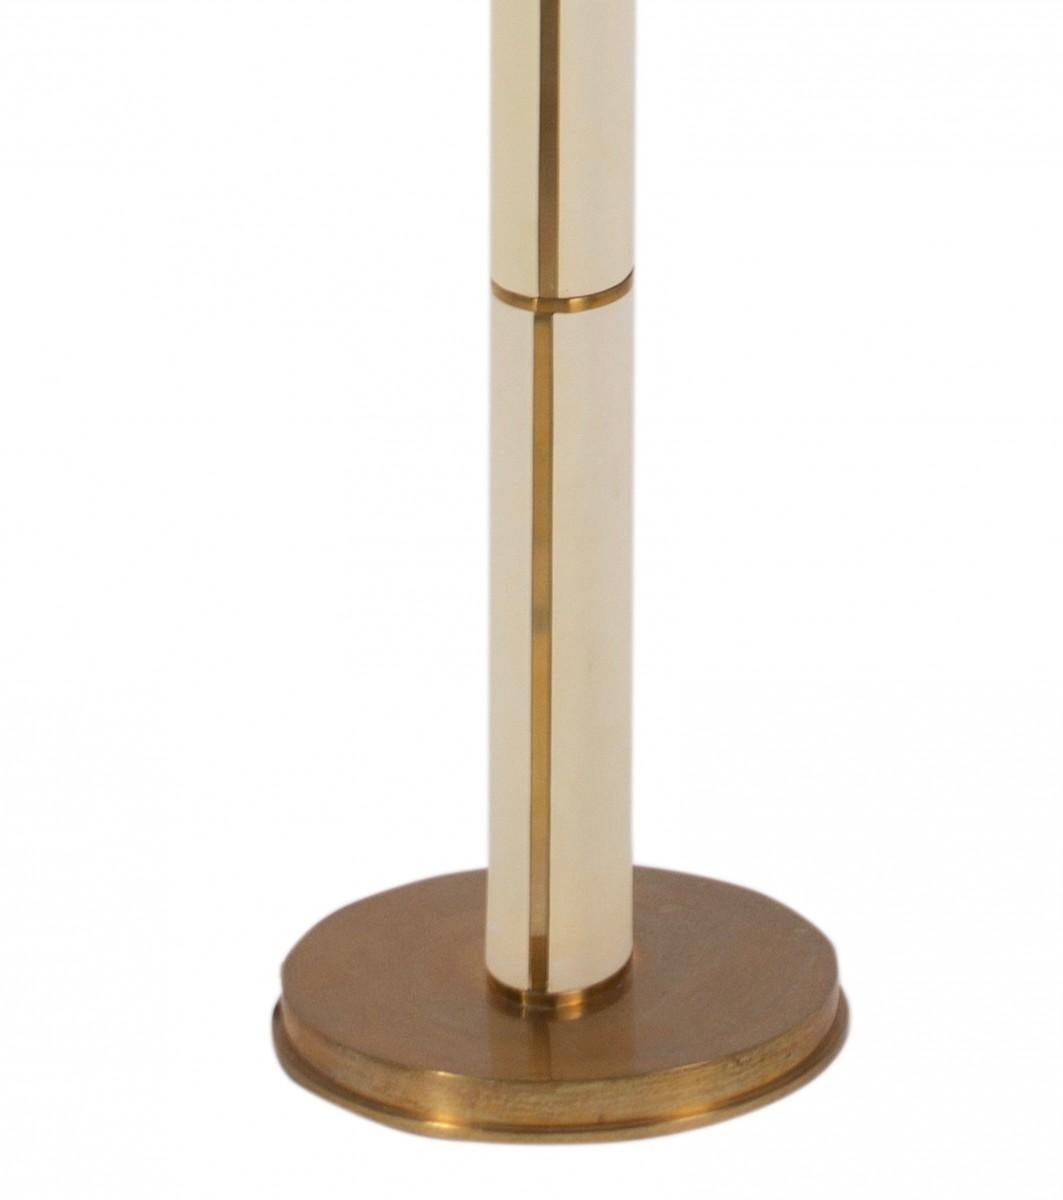 The upper fifth floor lamp by Ralph Lauren Home, circa 2000.

Featuring a parchment leather covered stem on a natural brass round base and topped with a silk shade.

Bulb: 150W A; dimmer switch; wired for US.

Dimensions: 61